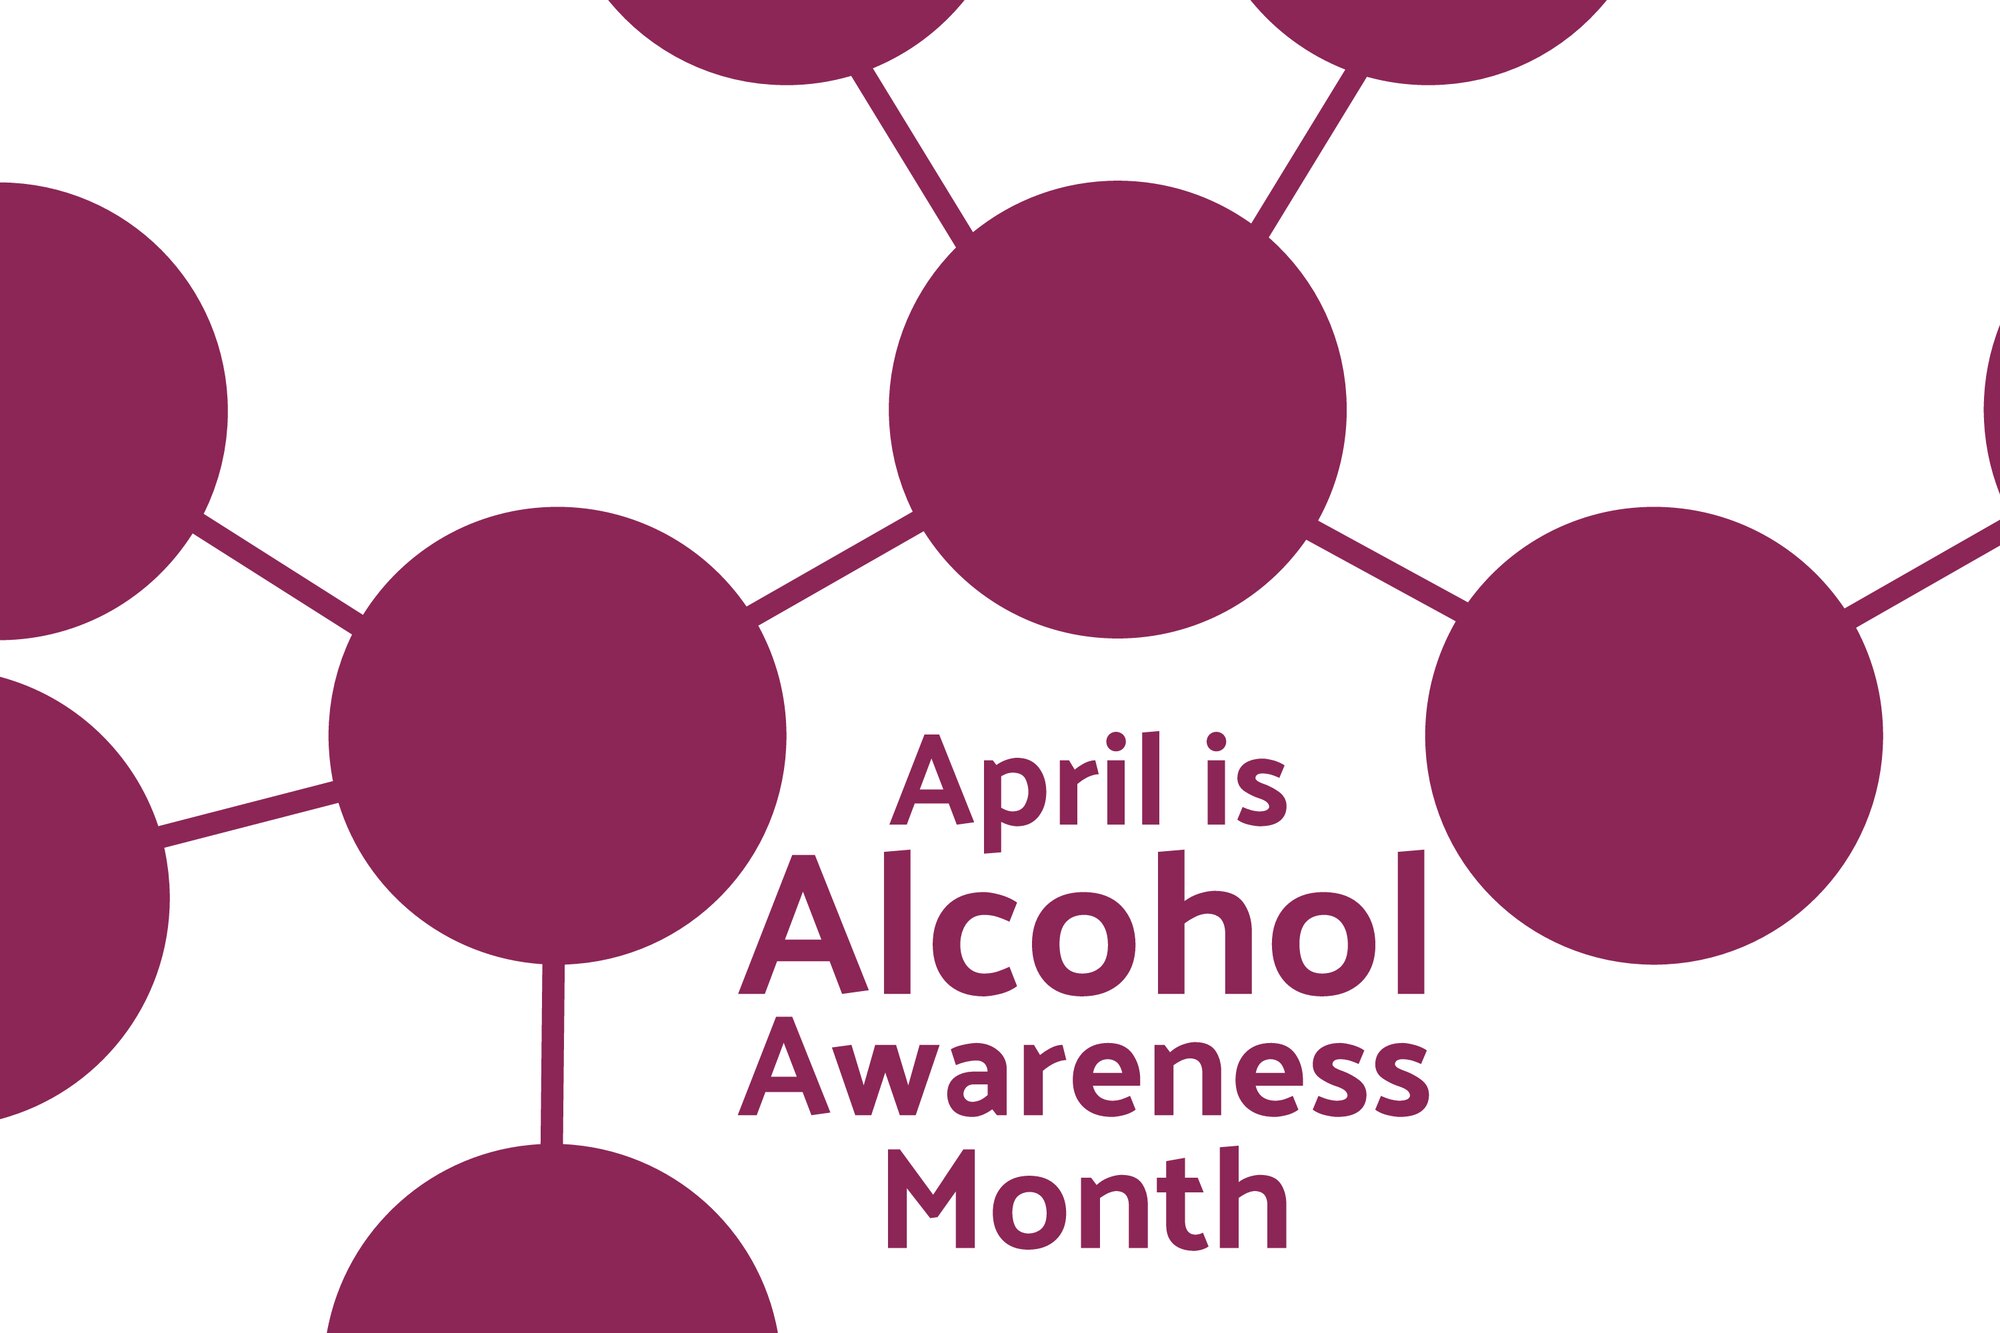 Graphic shows circles connected by lines with the words "April is Alcohol Awareness Month" underneath.